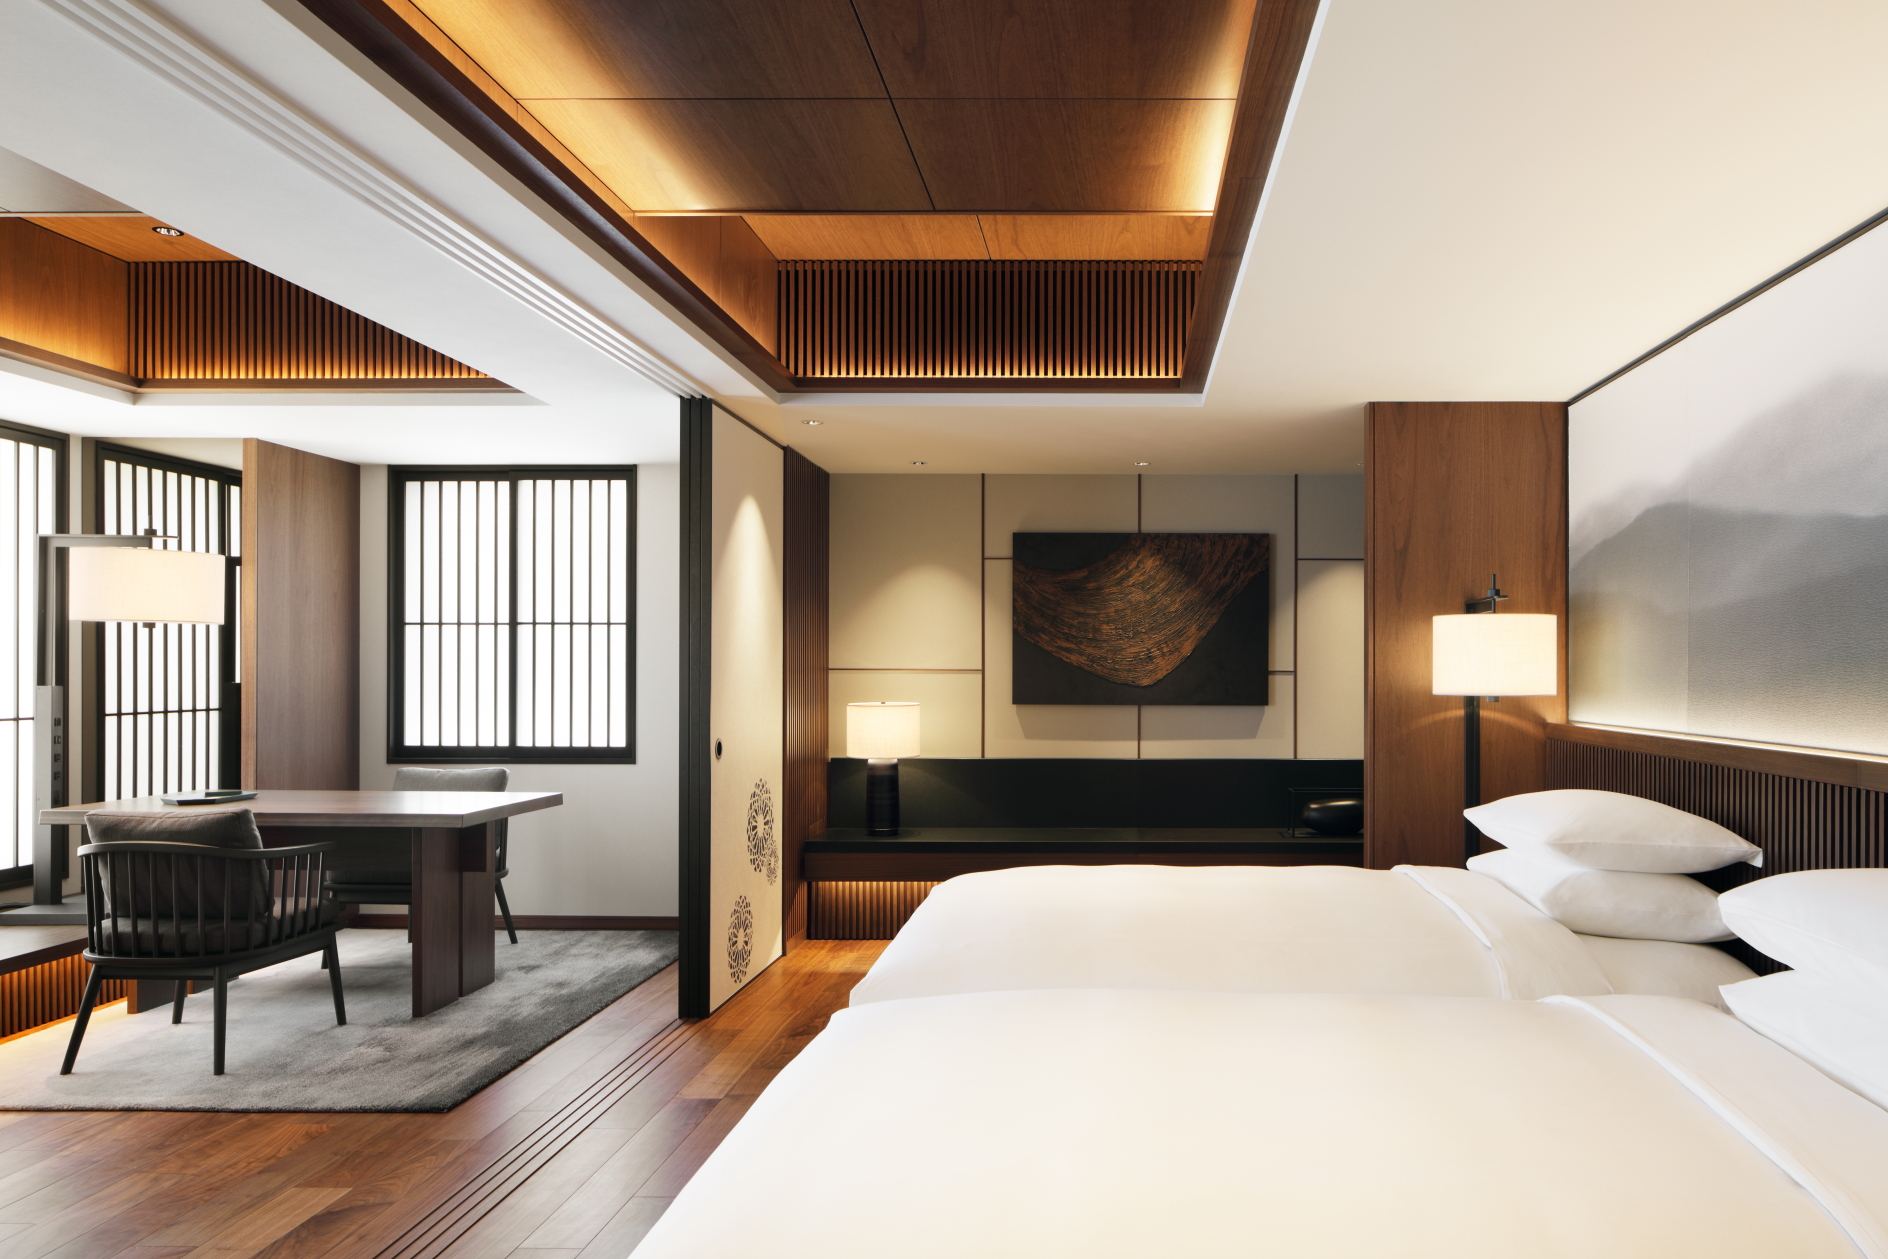 Chapter Suite at Hiyori Chapter Kyoto, a Tribute Portfolio Hotel in Japan. Click to enlarge.